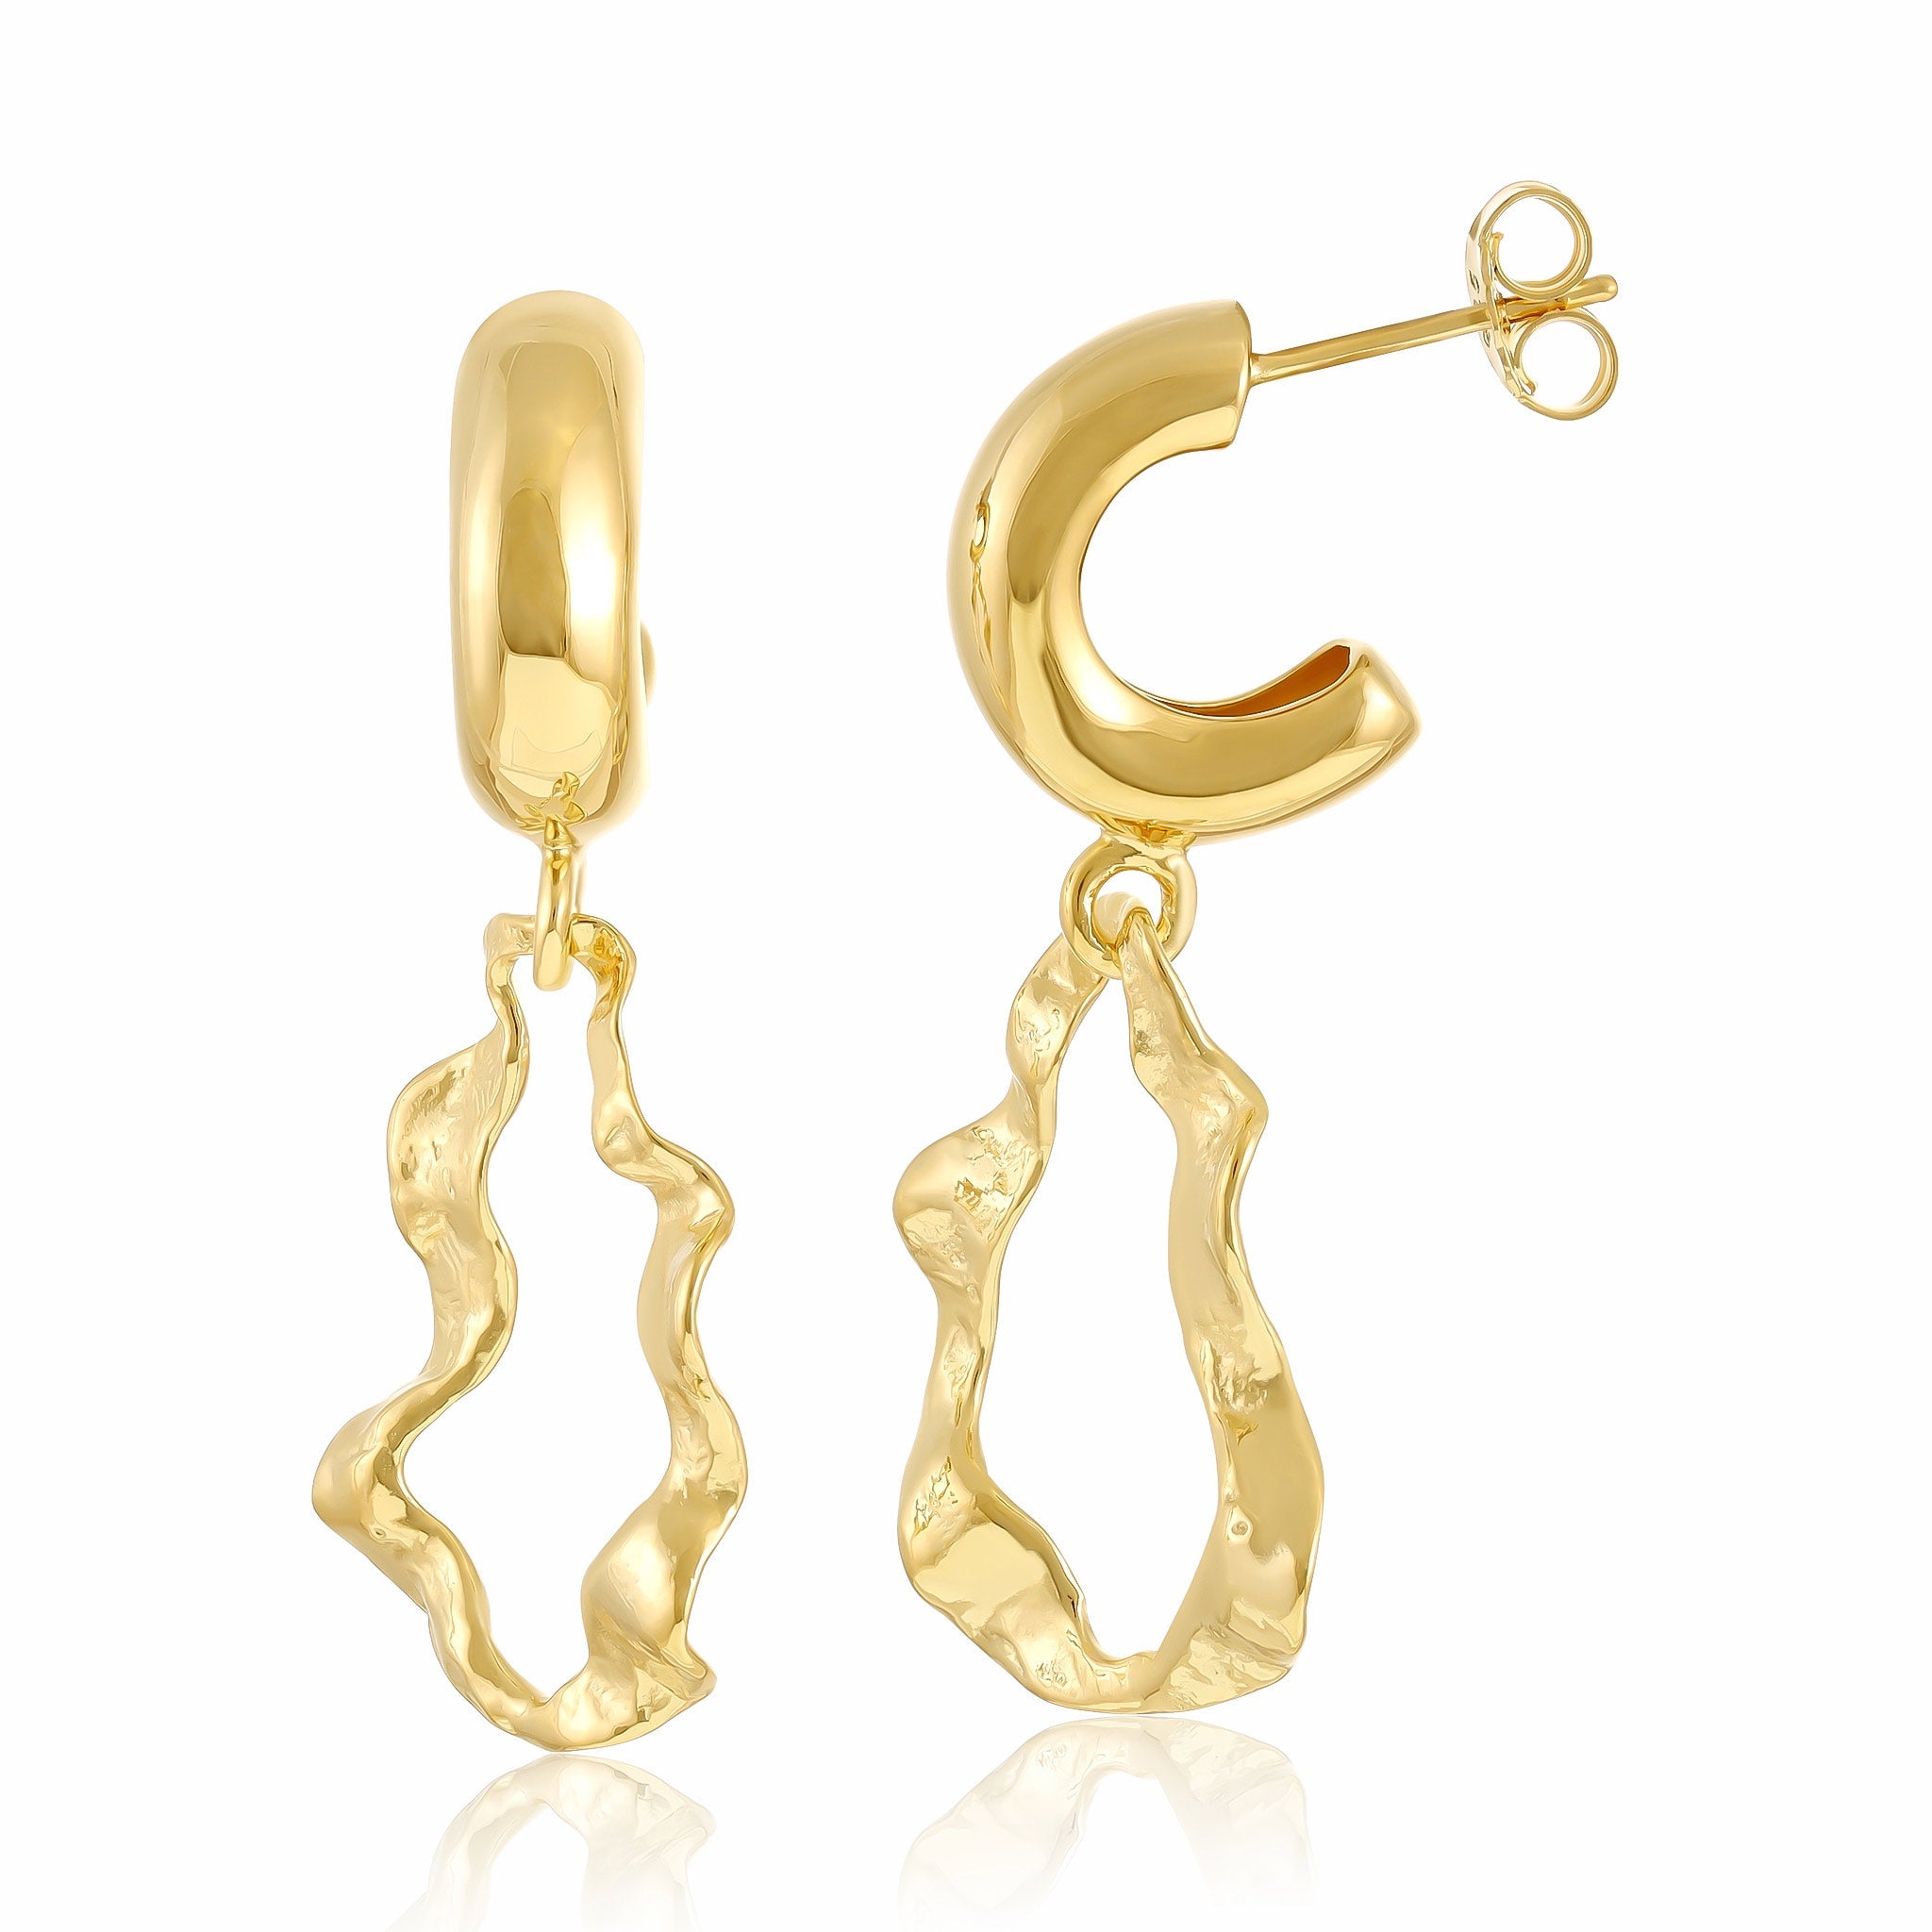 18ct 1 micron gold plated sterling silver earrings with twisted gold drop PER3013 - FJewellery